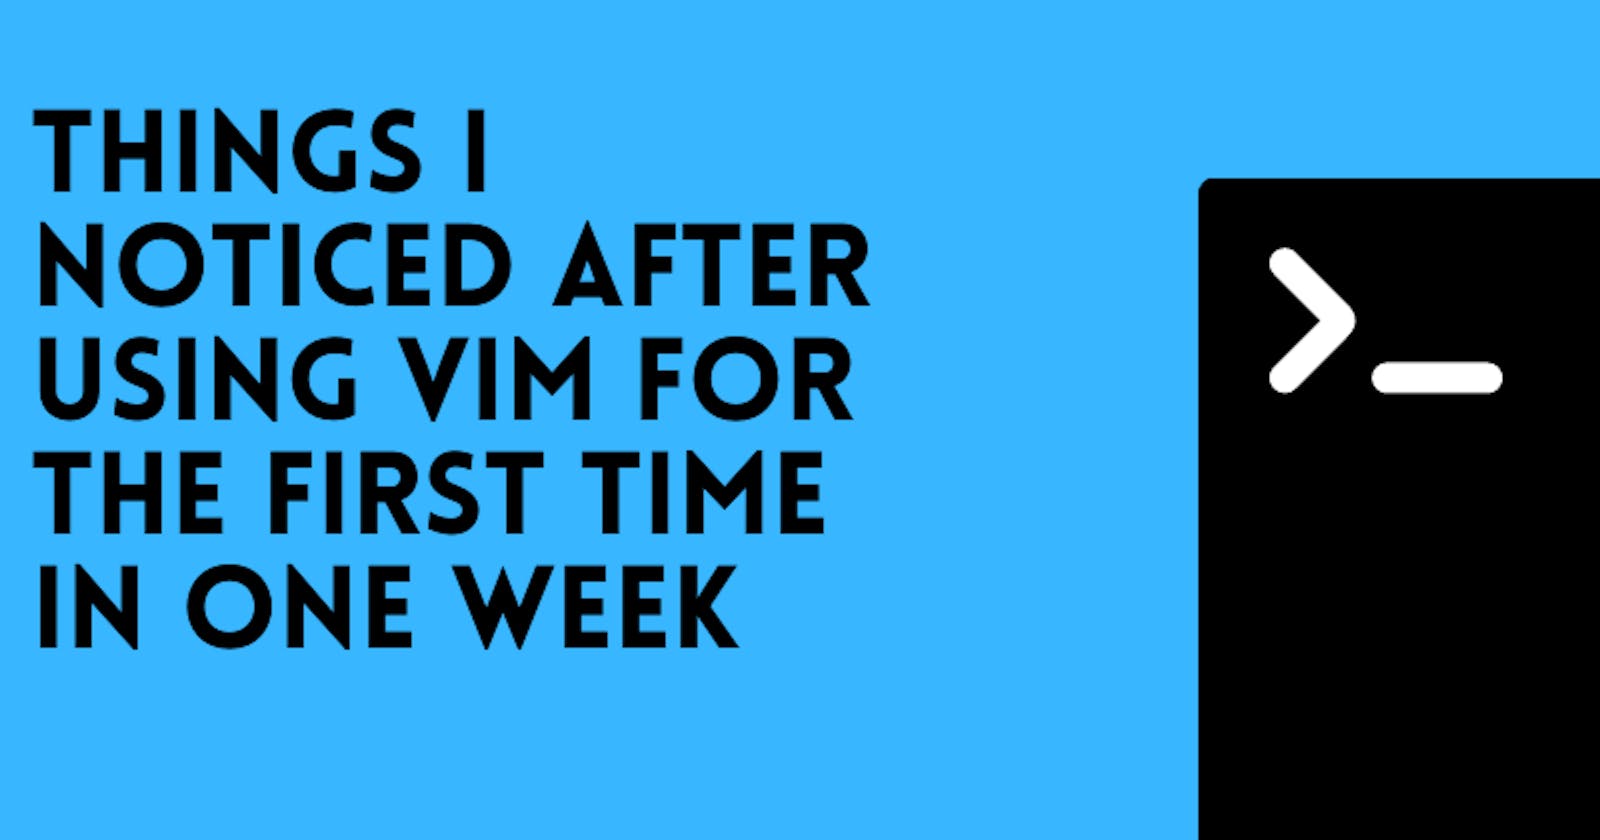 Things I noticed after using Vim for the first time in one week